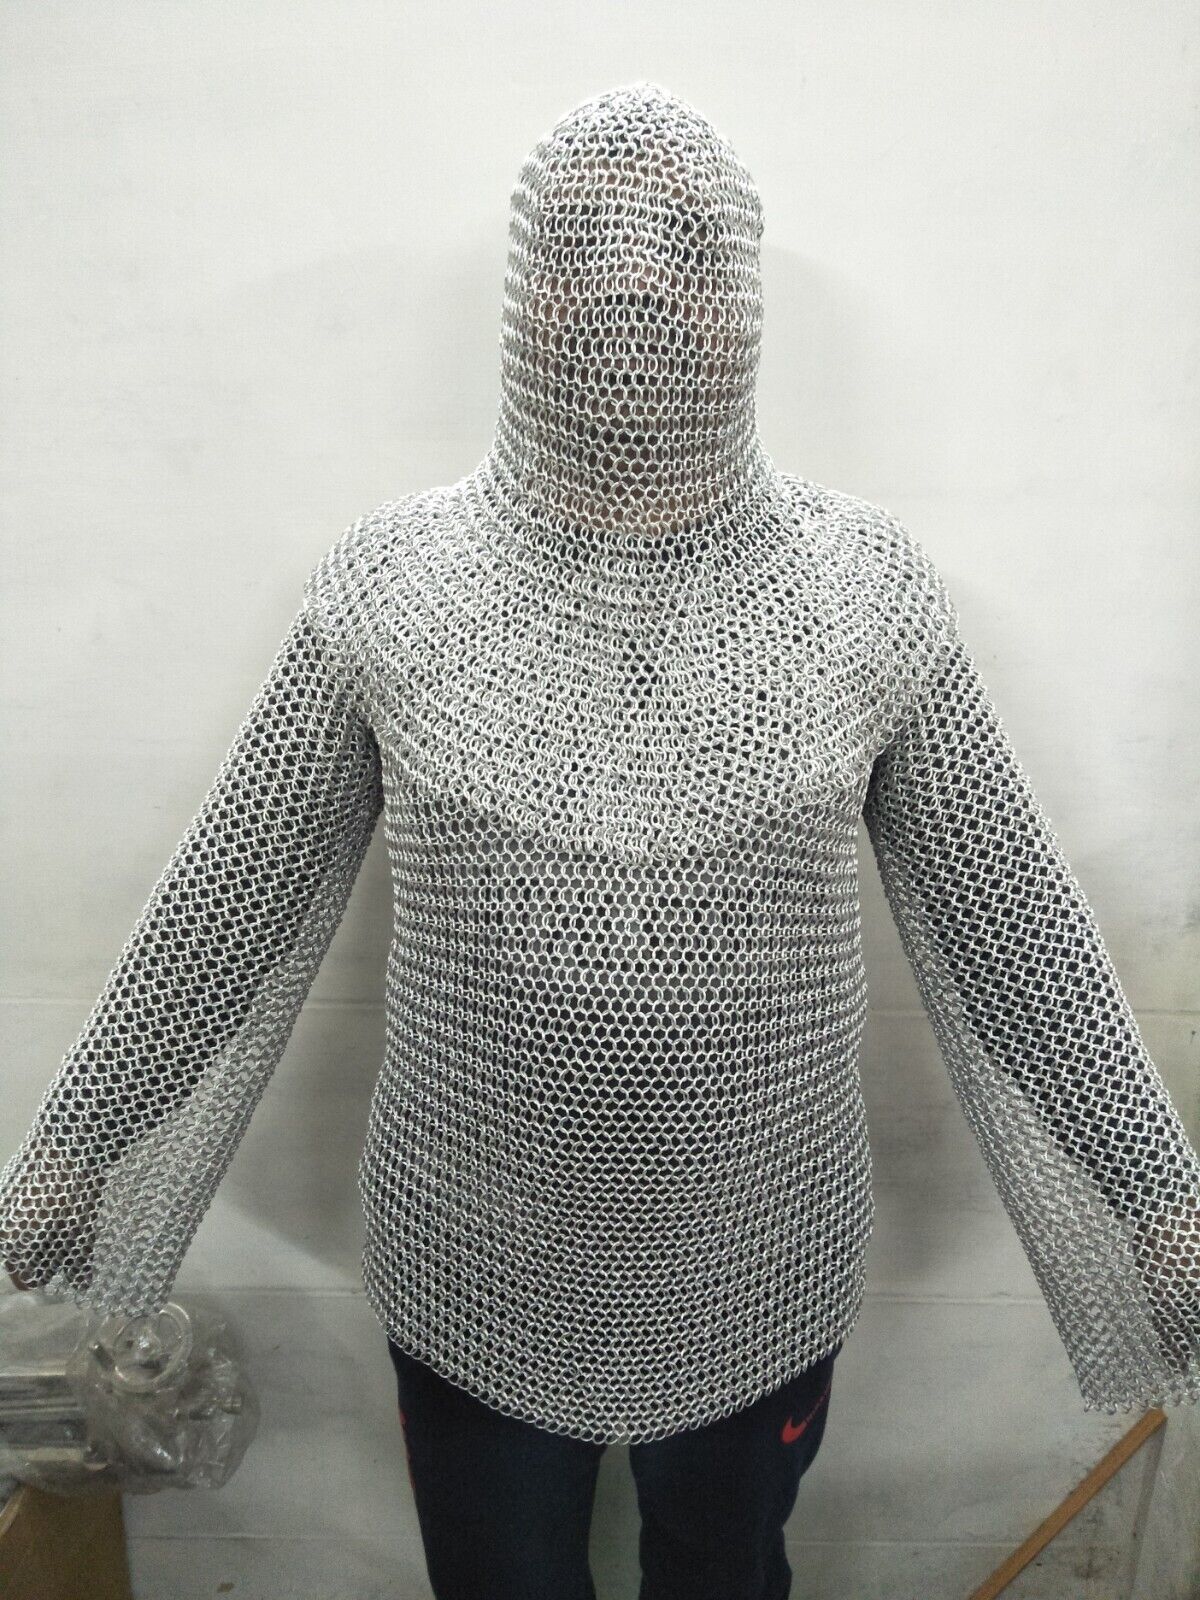 Primary image for Chainmail Shirt, Coif, Chausses, Aluminium Butted Rings